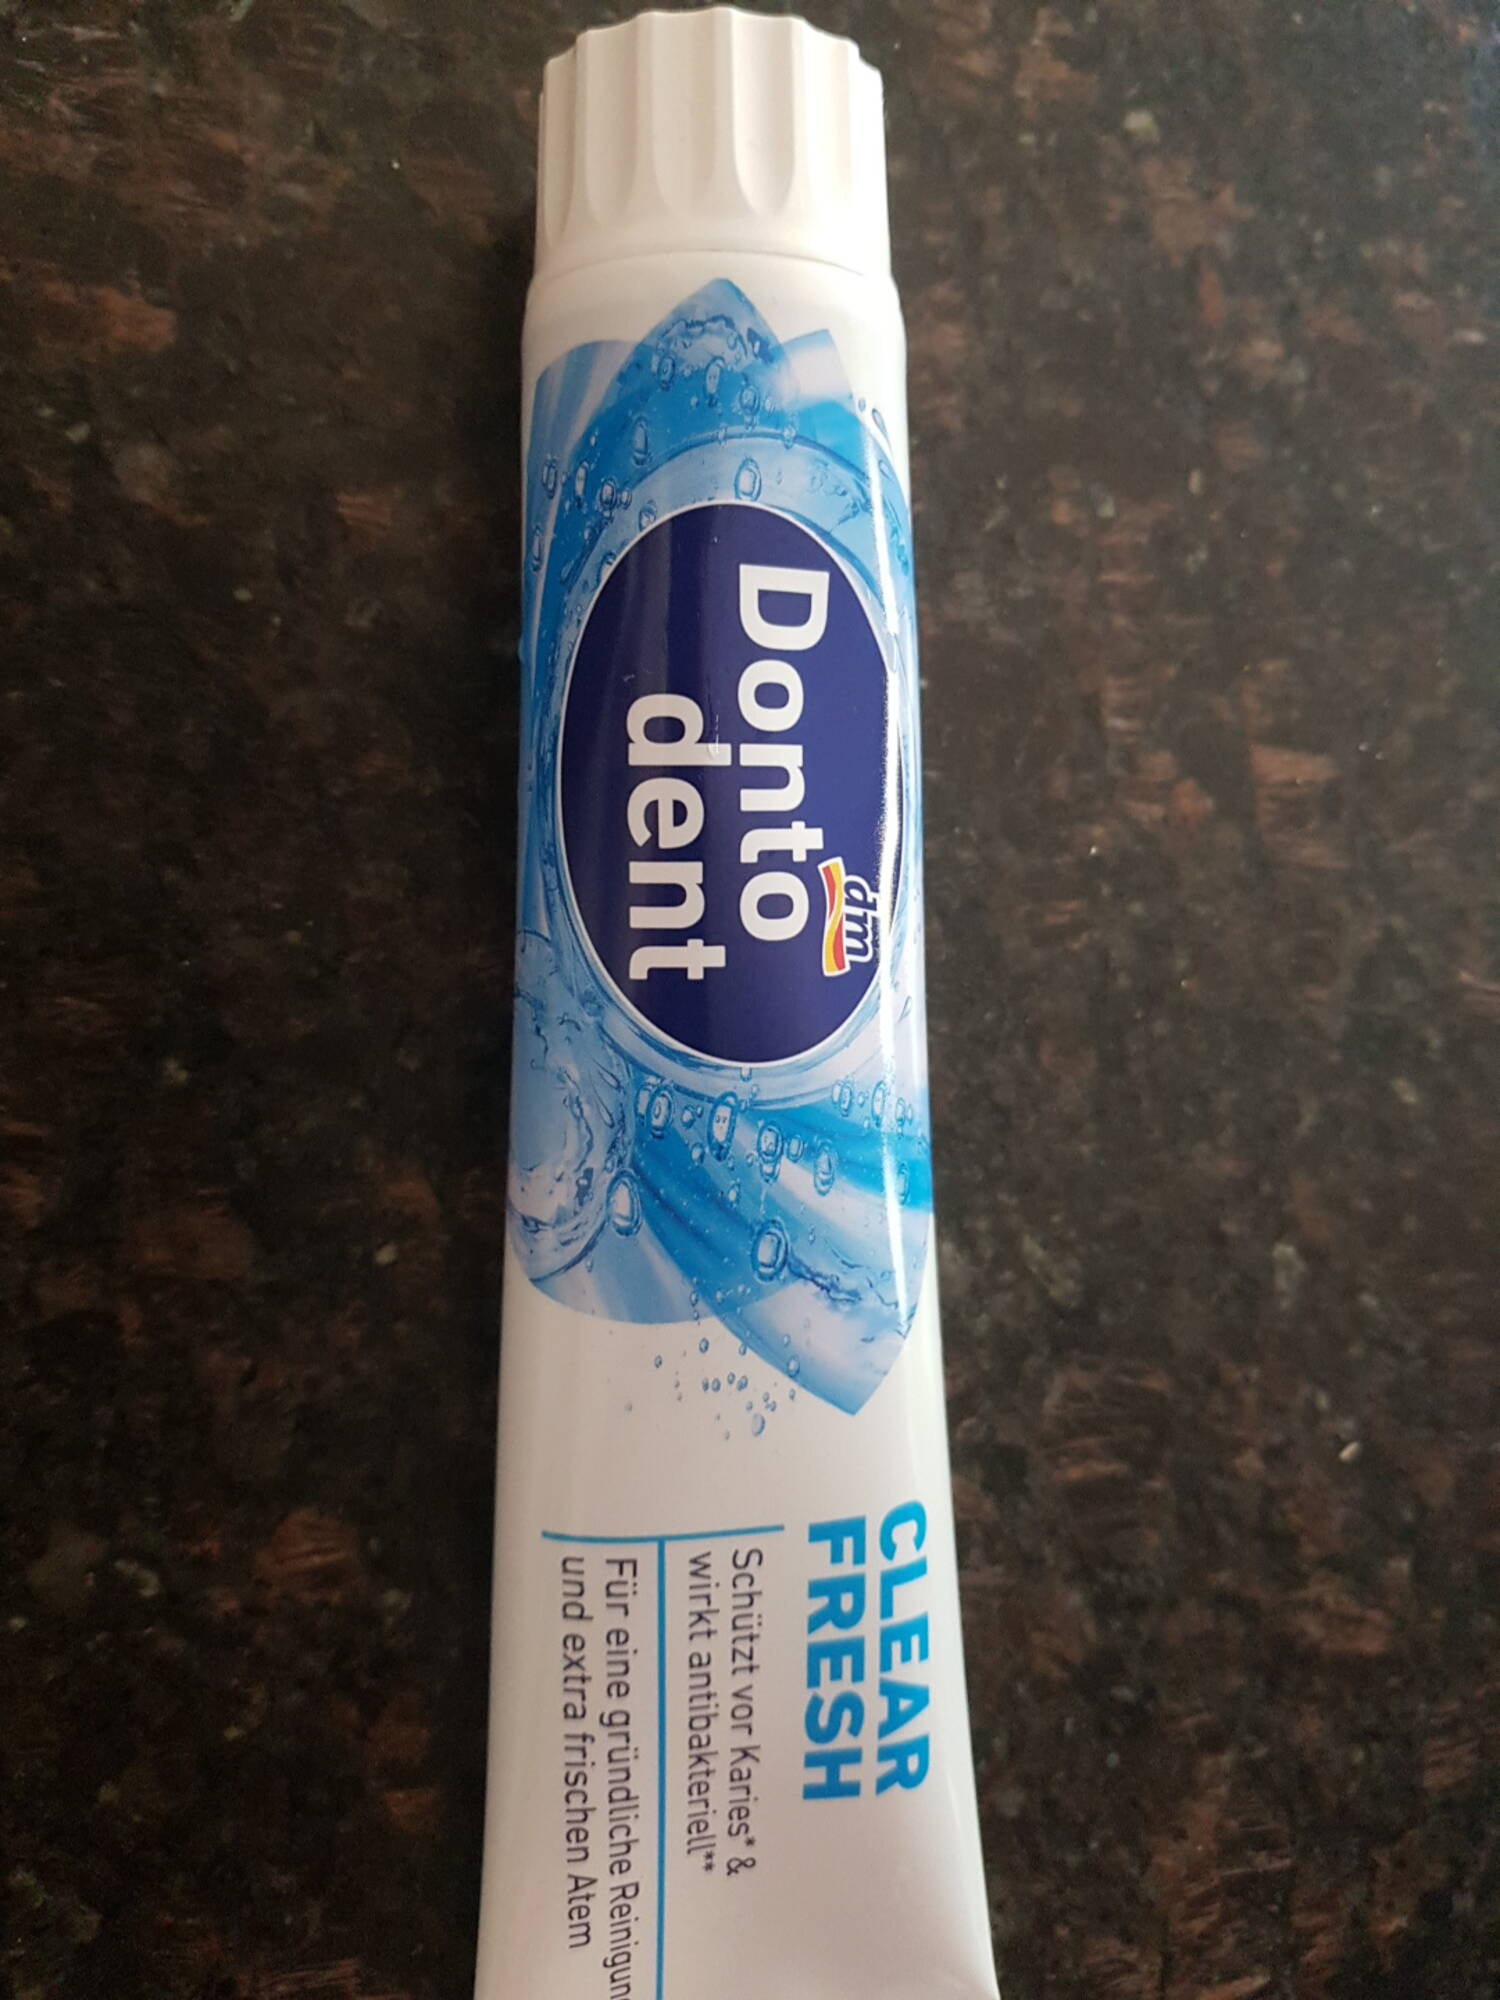 DM - Dontodent clear fresh